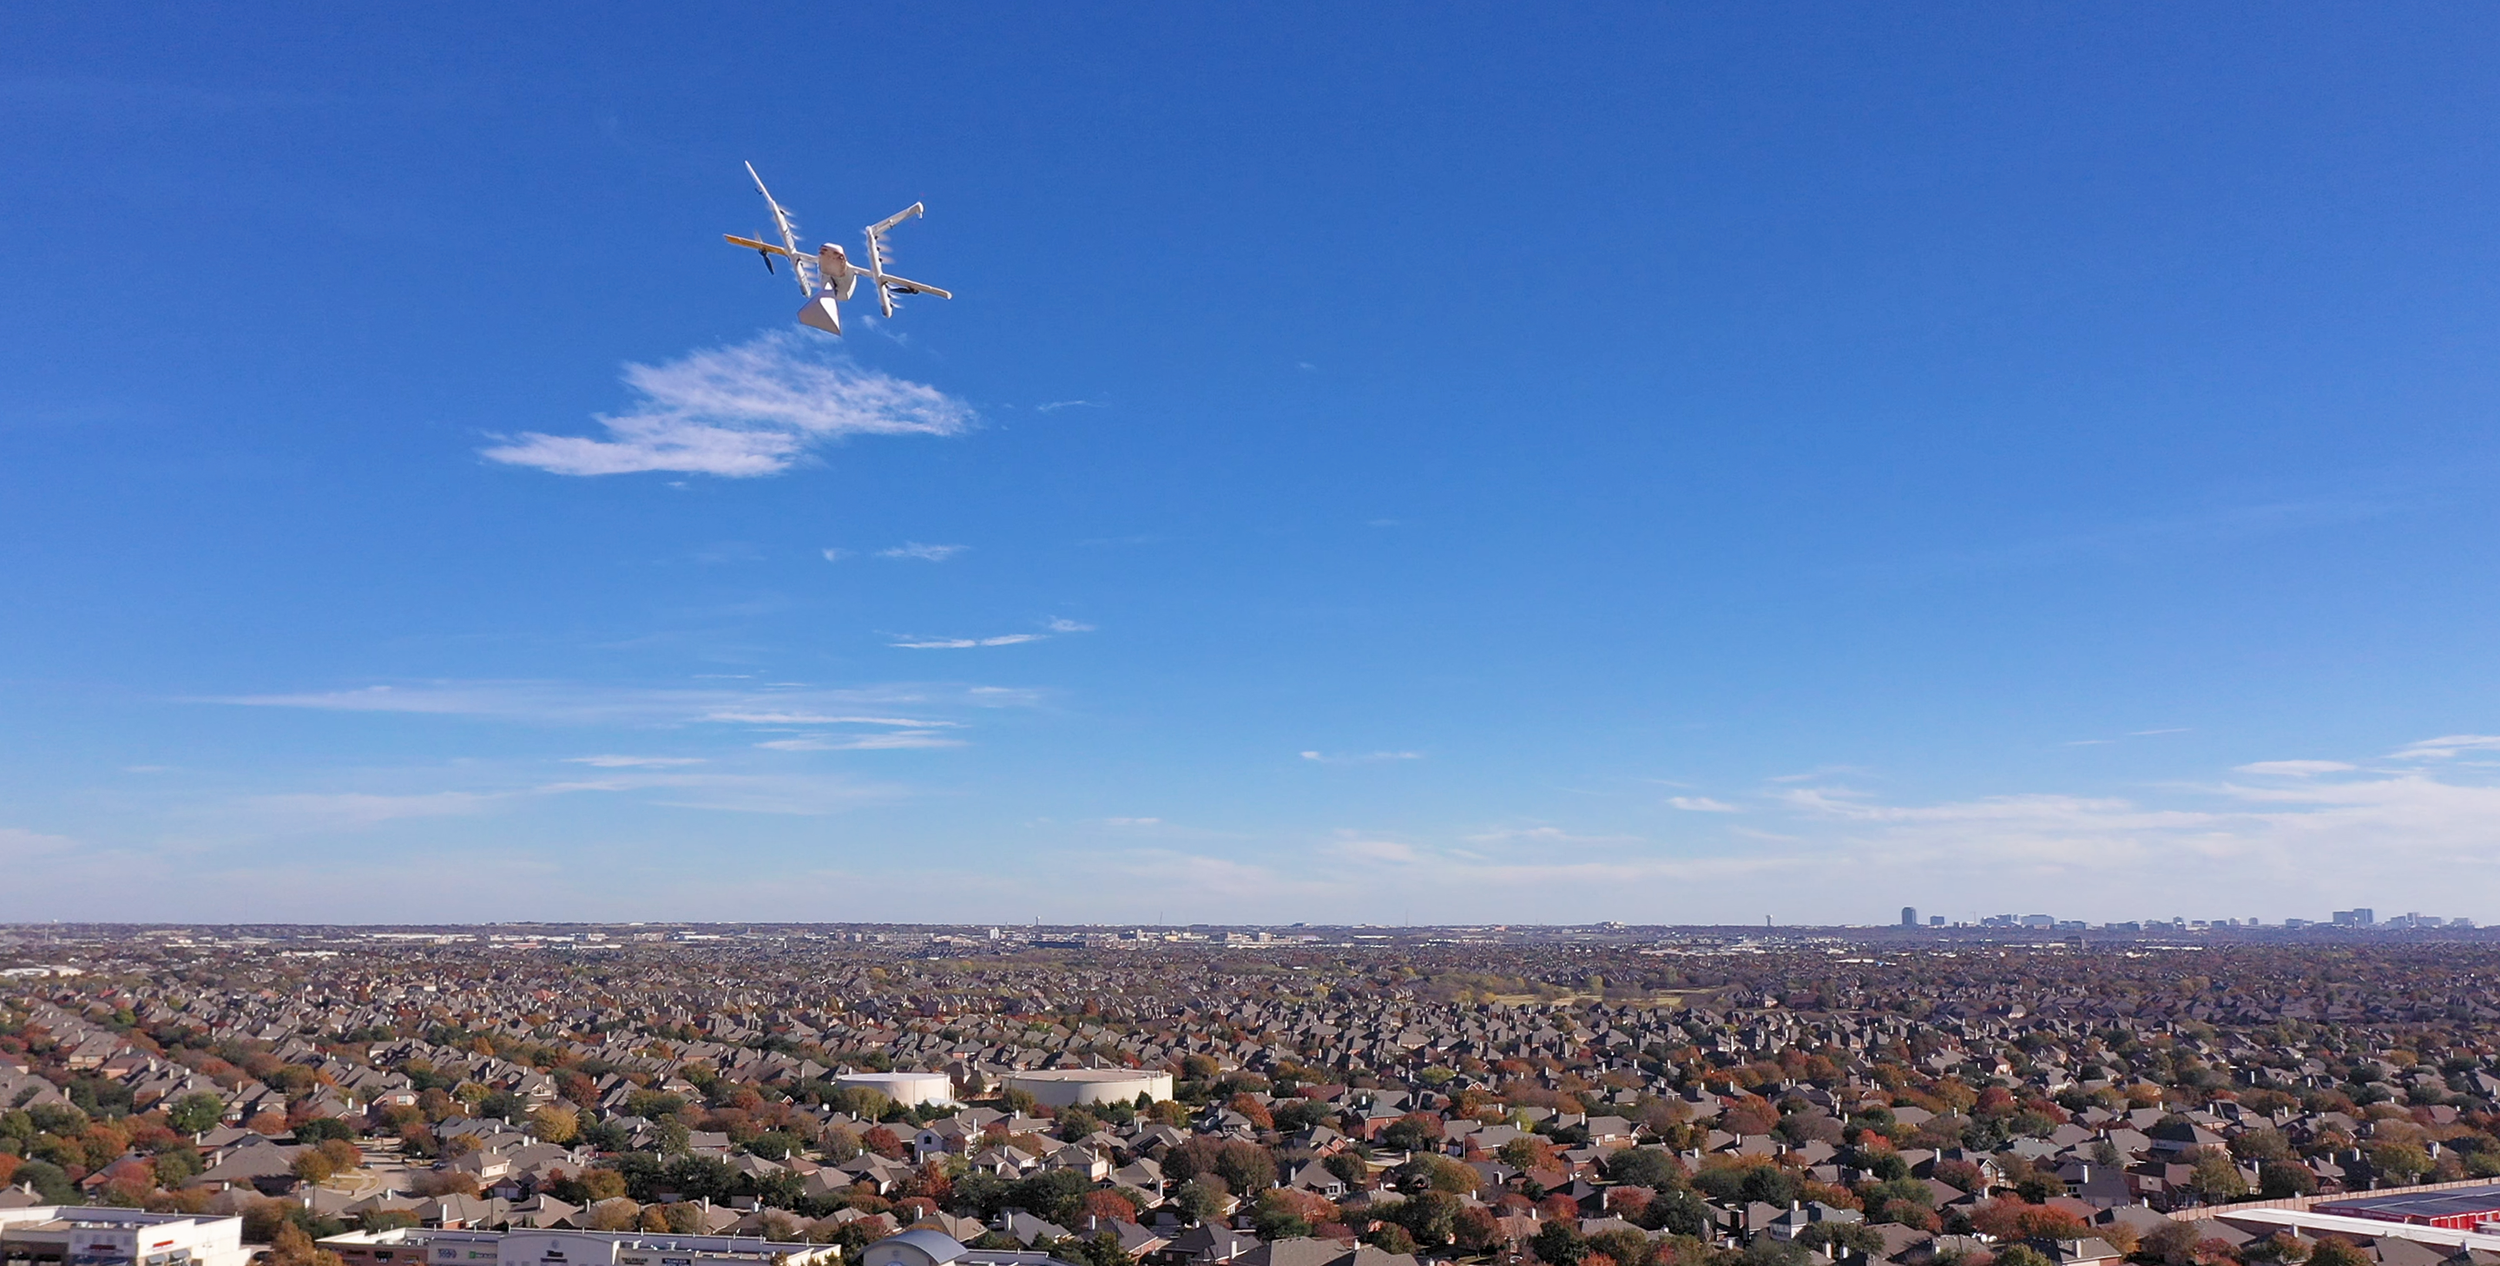 A drone carrying a package flies high above a flat suburban landscape